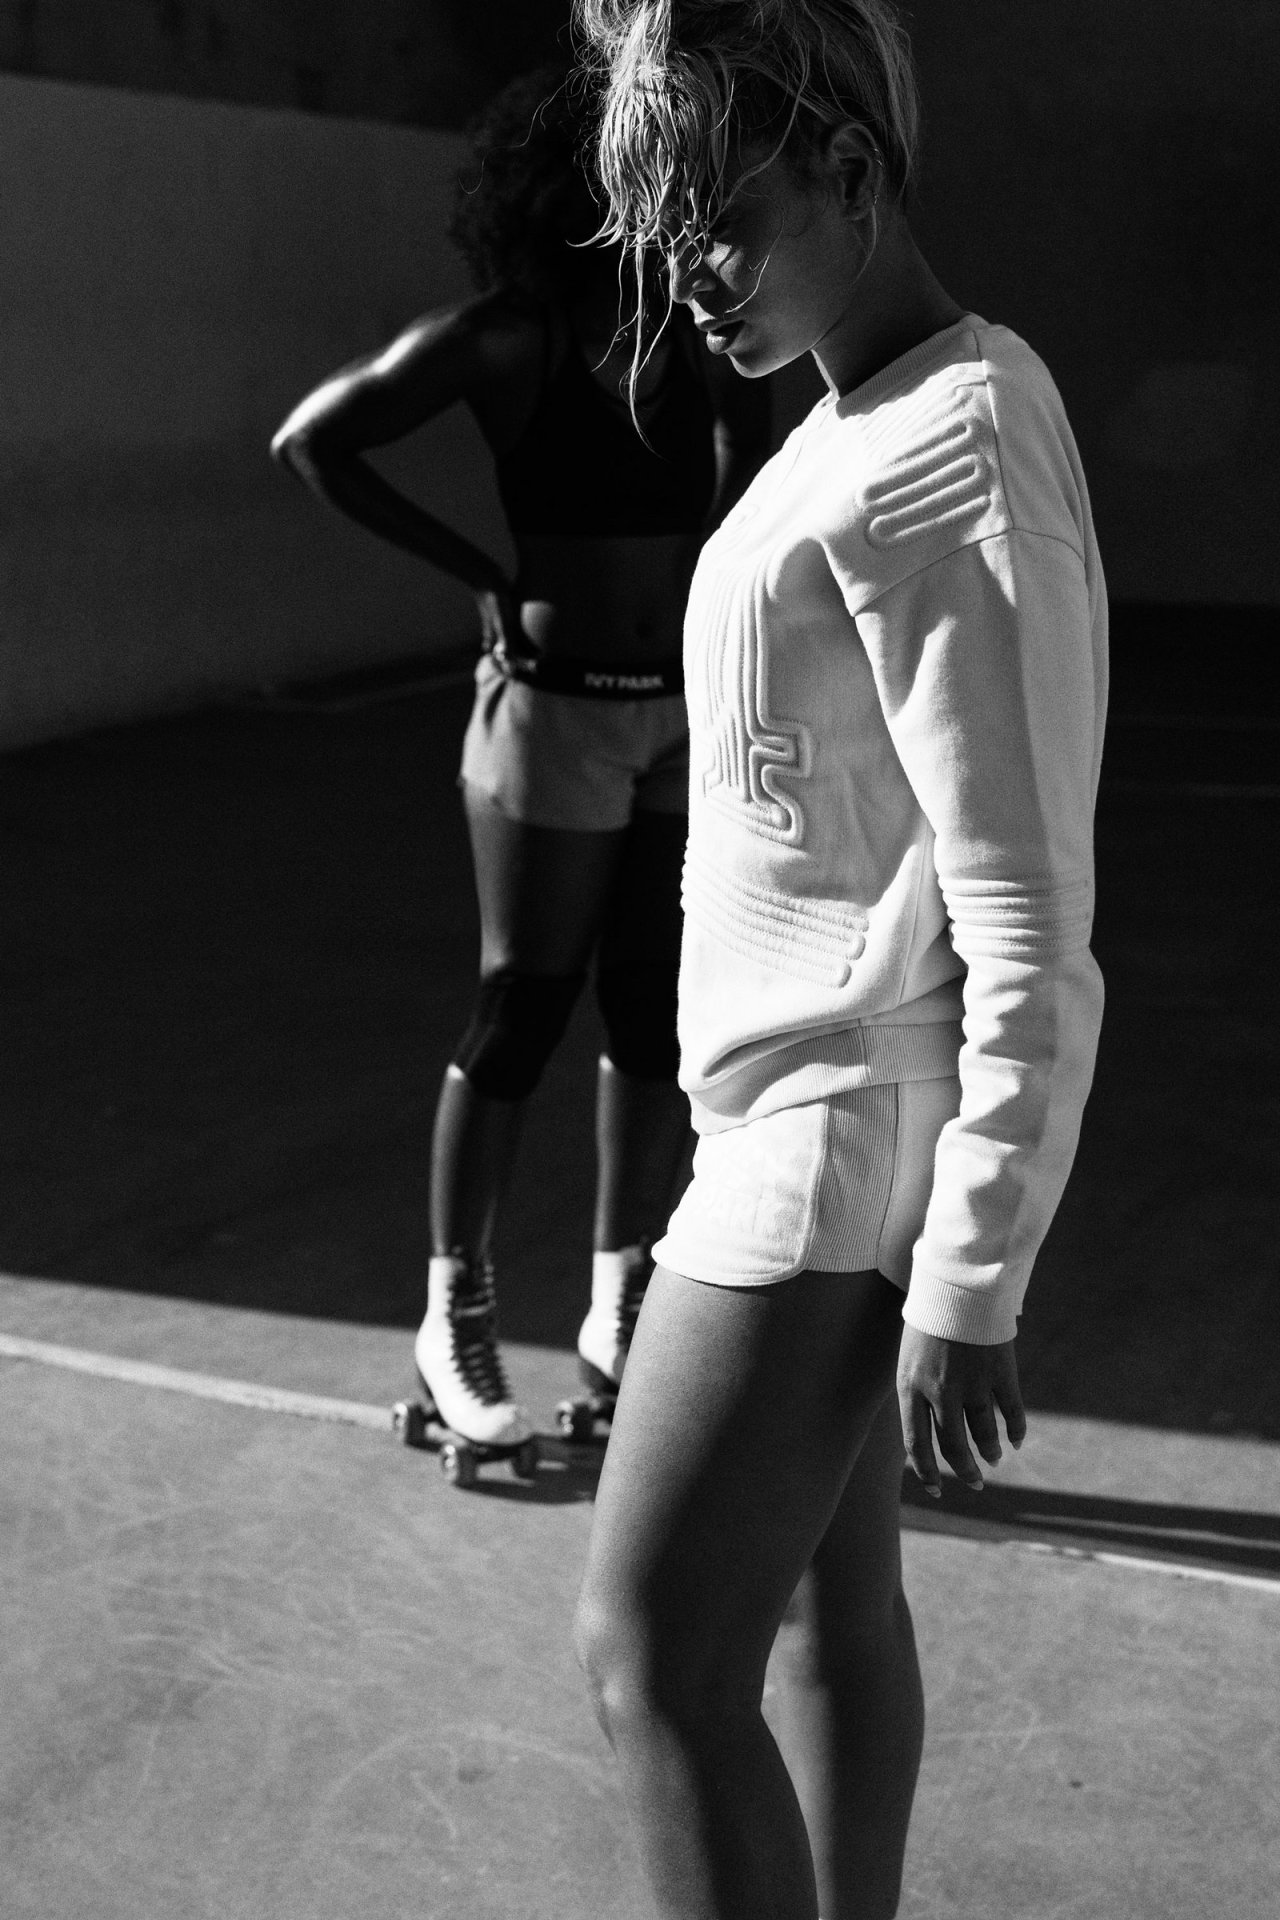 voguerunway:
“ Get in formation. @beyonce‘s new athleisure line, Ivy Park, has arrived! Find details exclusively: here.
”